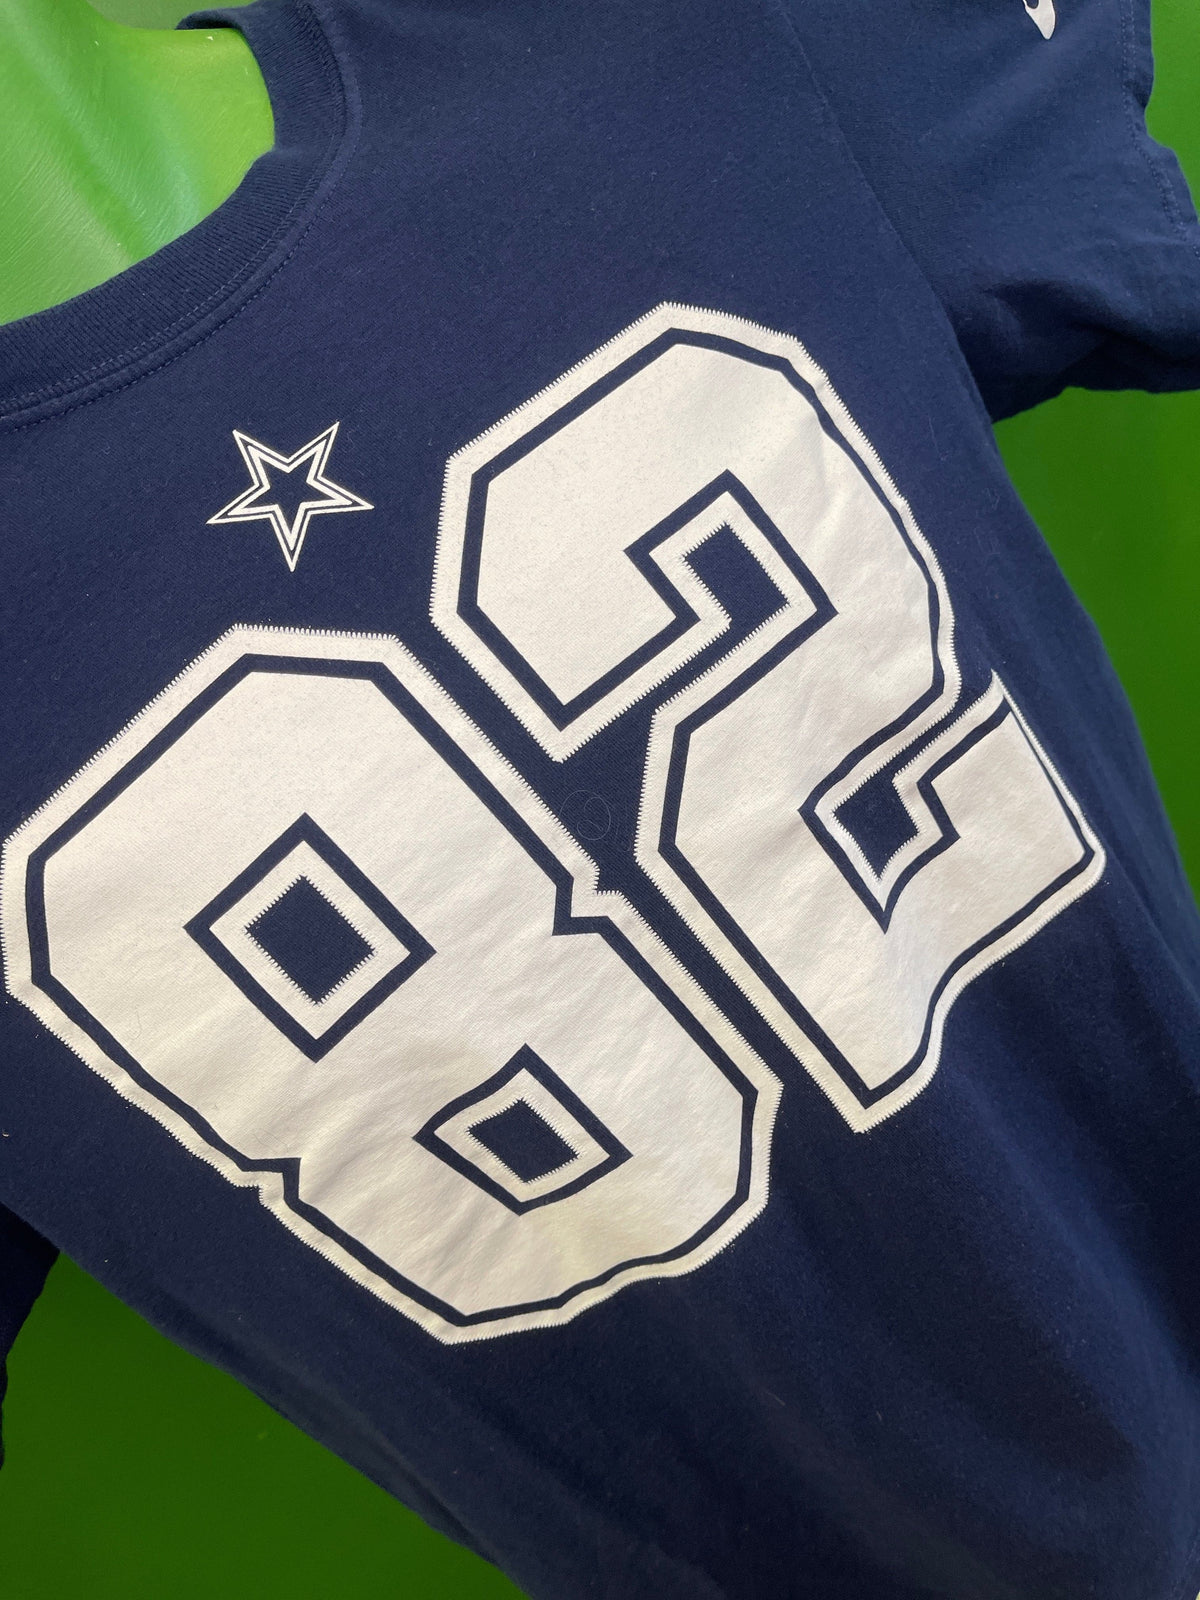 NFL Dallas Cowboys Witten #82 100% Cotton T-Shirt Youth Large 14-16